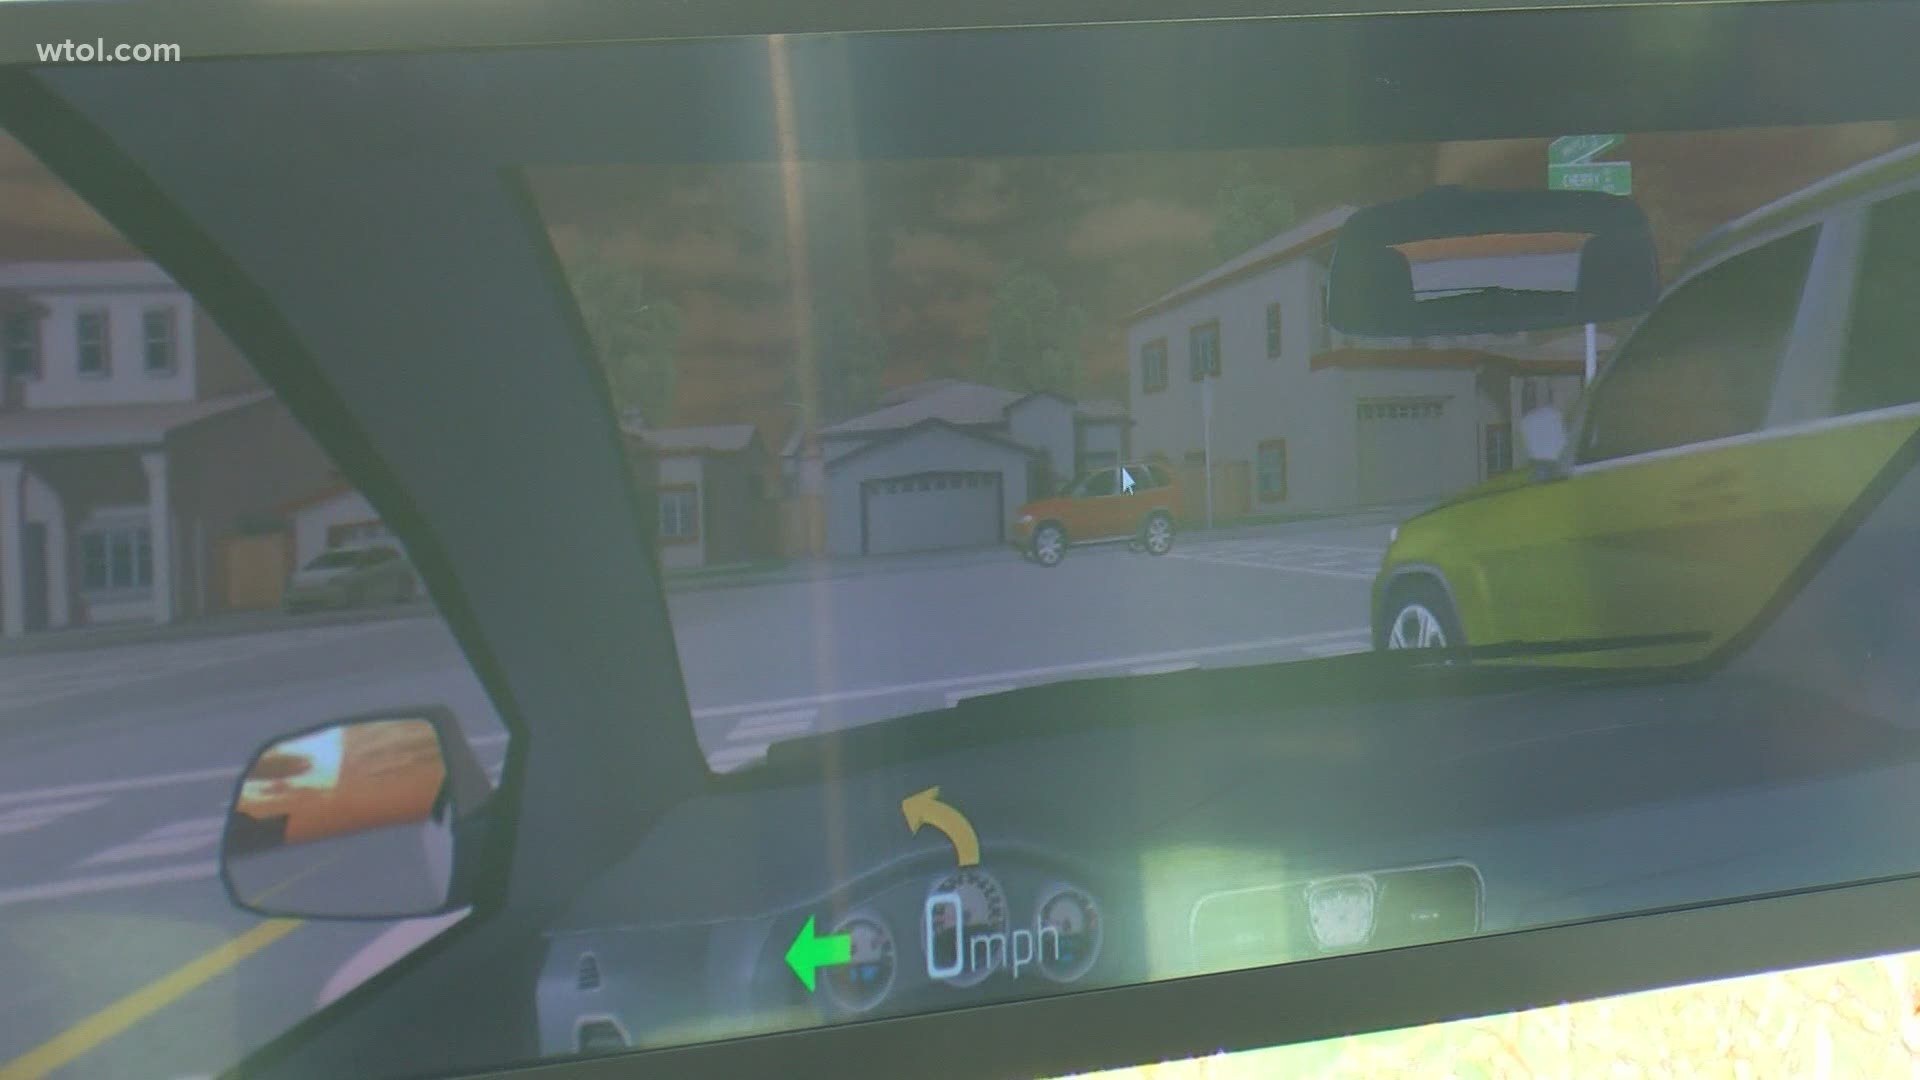 Driving simulator showing the dashboard, road, rear-view mirror